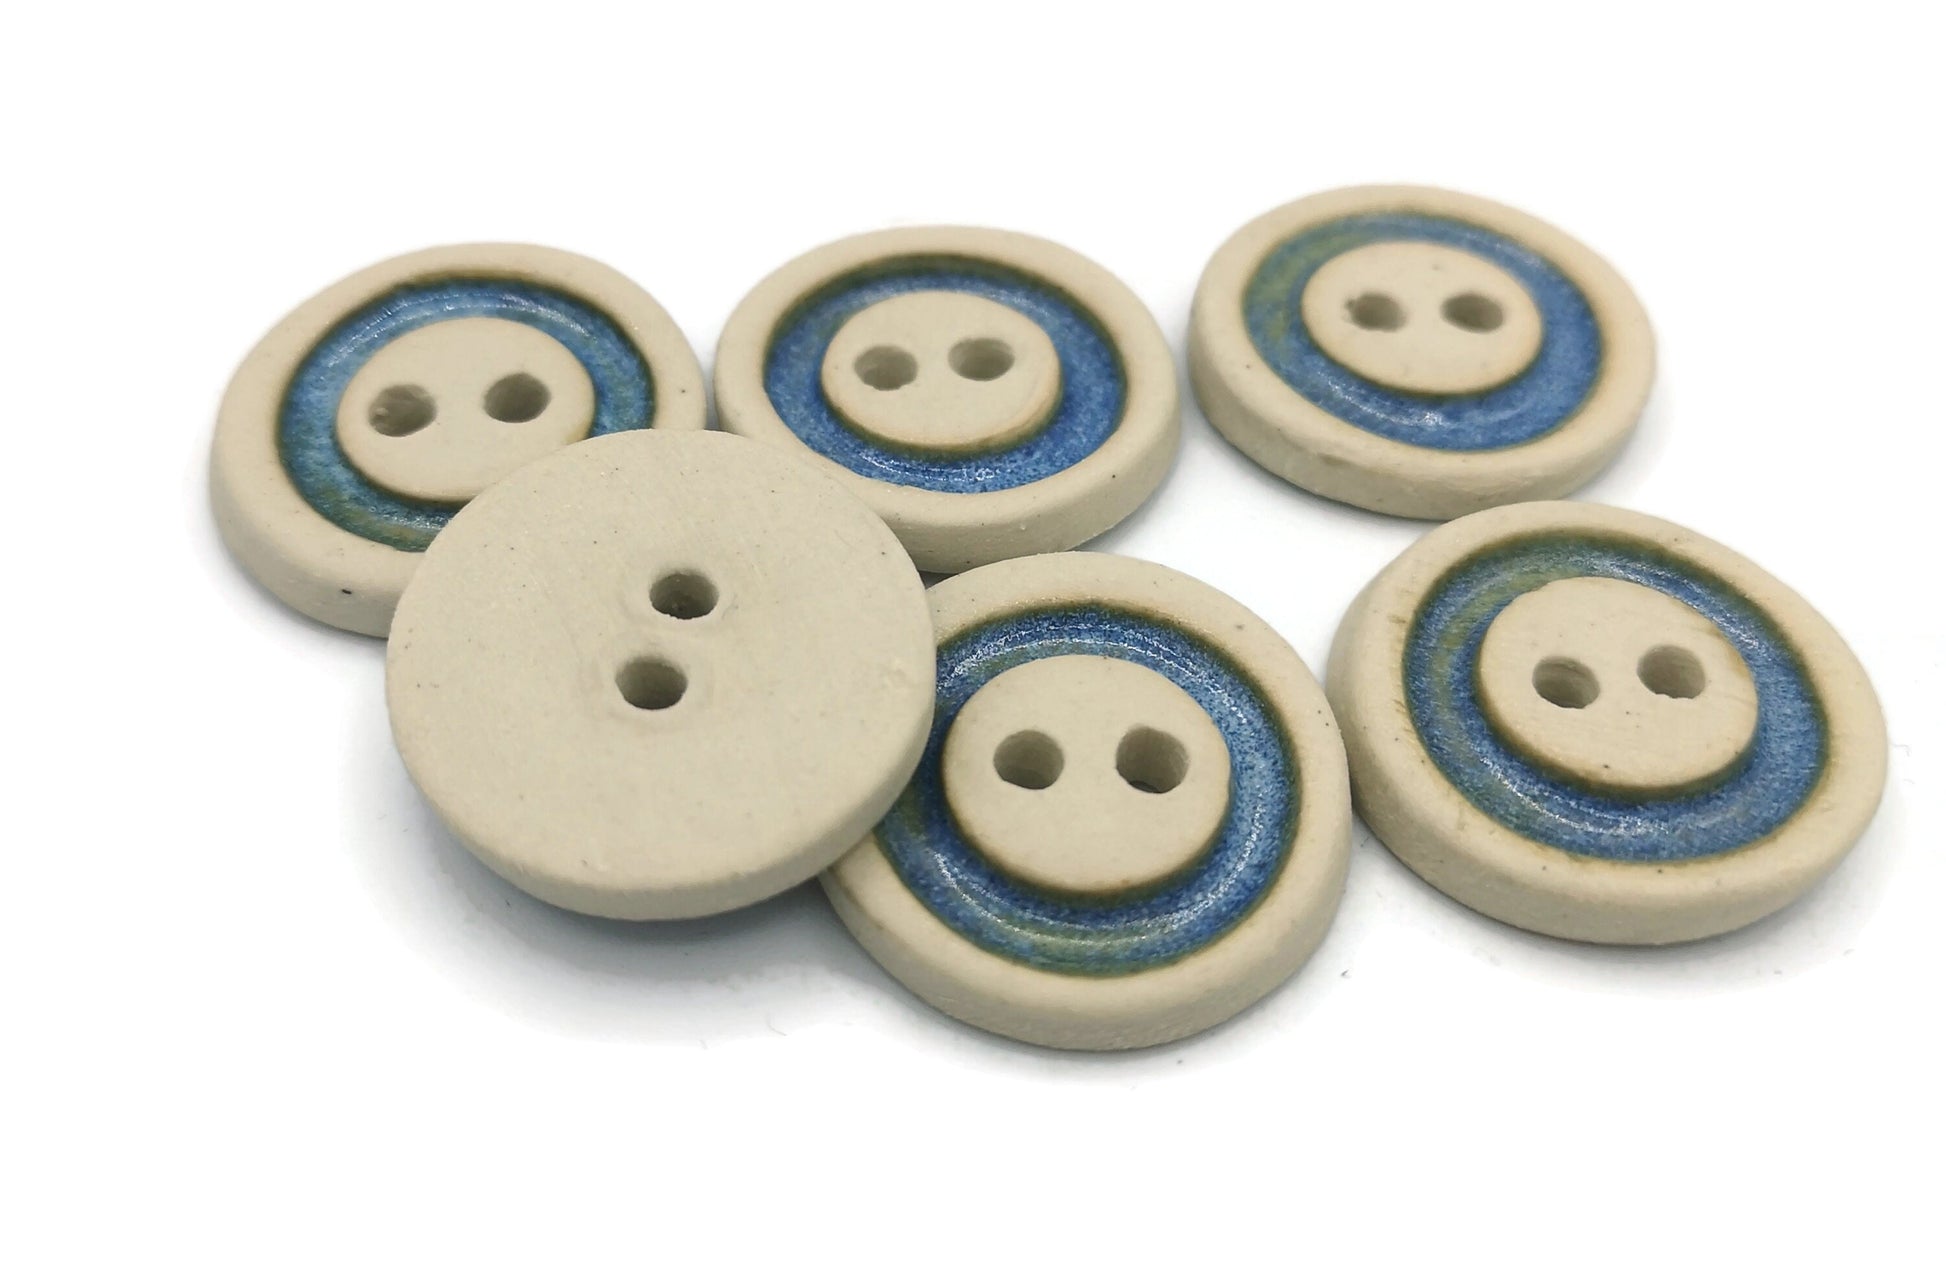 6Pc 25mm/1in Handmade Ceramic Sewing Buttons, Matte Beige With Glossy Blue Accent, Novelty Clay Buttons For Crafts, Unique Pottery Buttons - Ceramica Ana Rafael